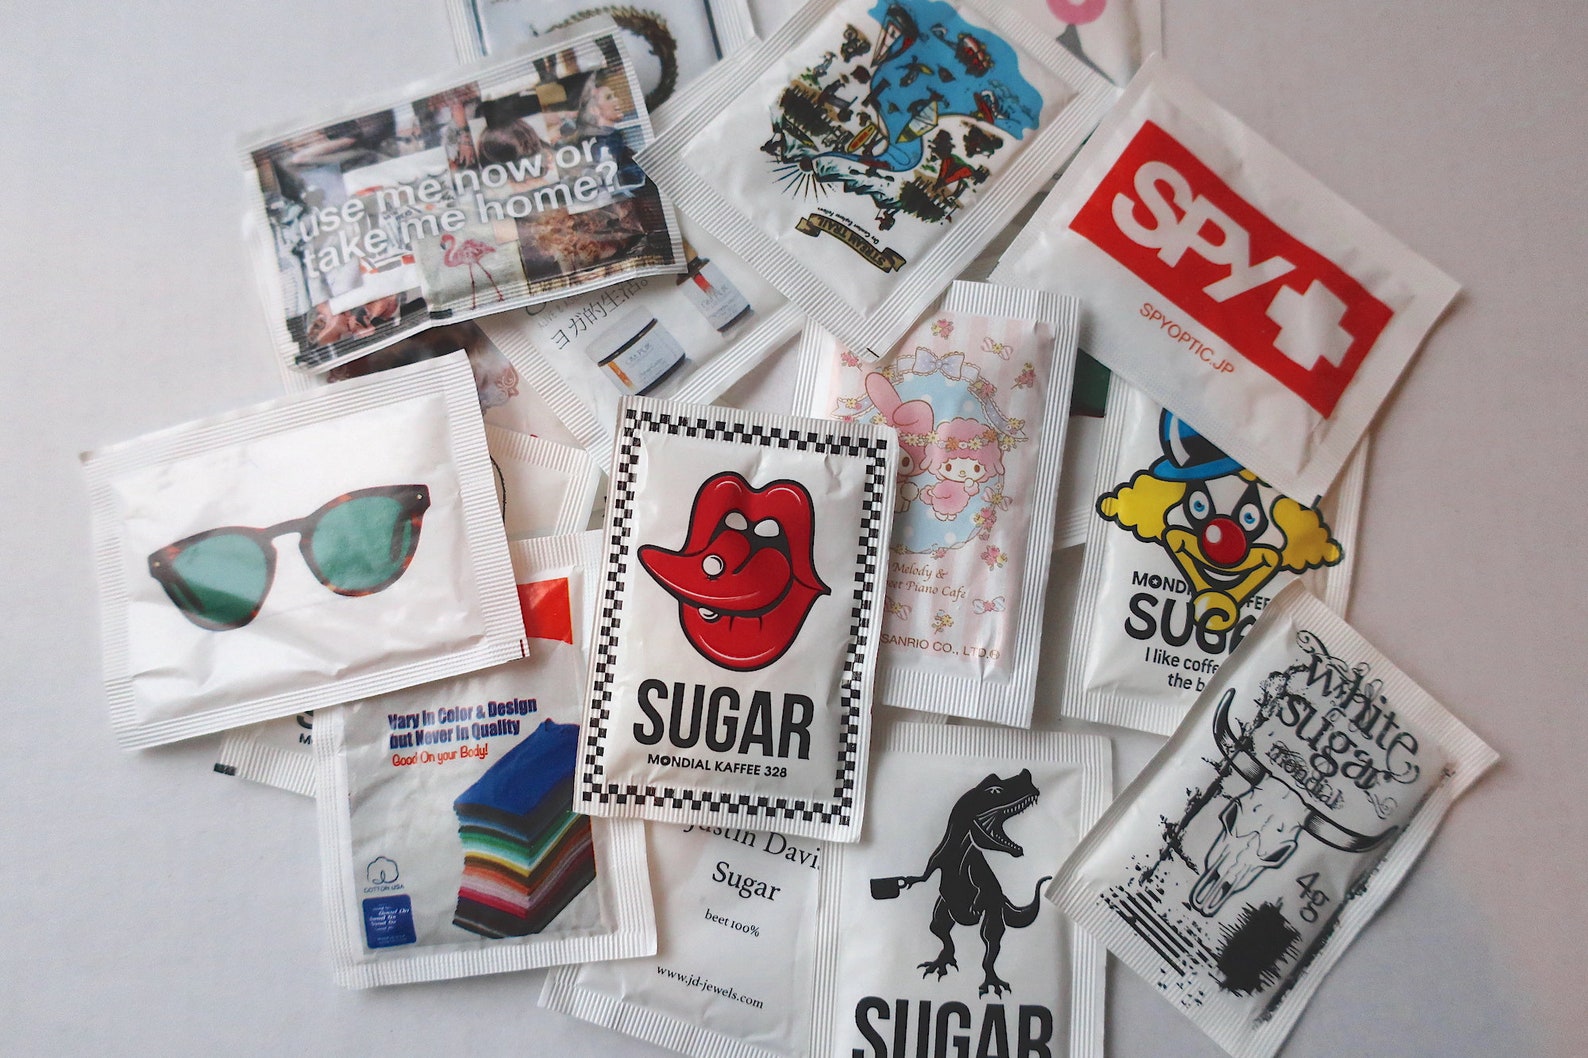 20pcs Assorted Sugar Packets Advertising Japanese Promotion - Etsy